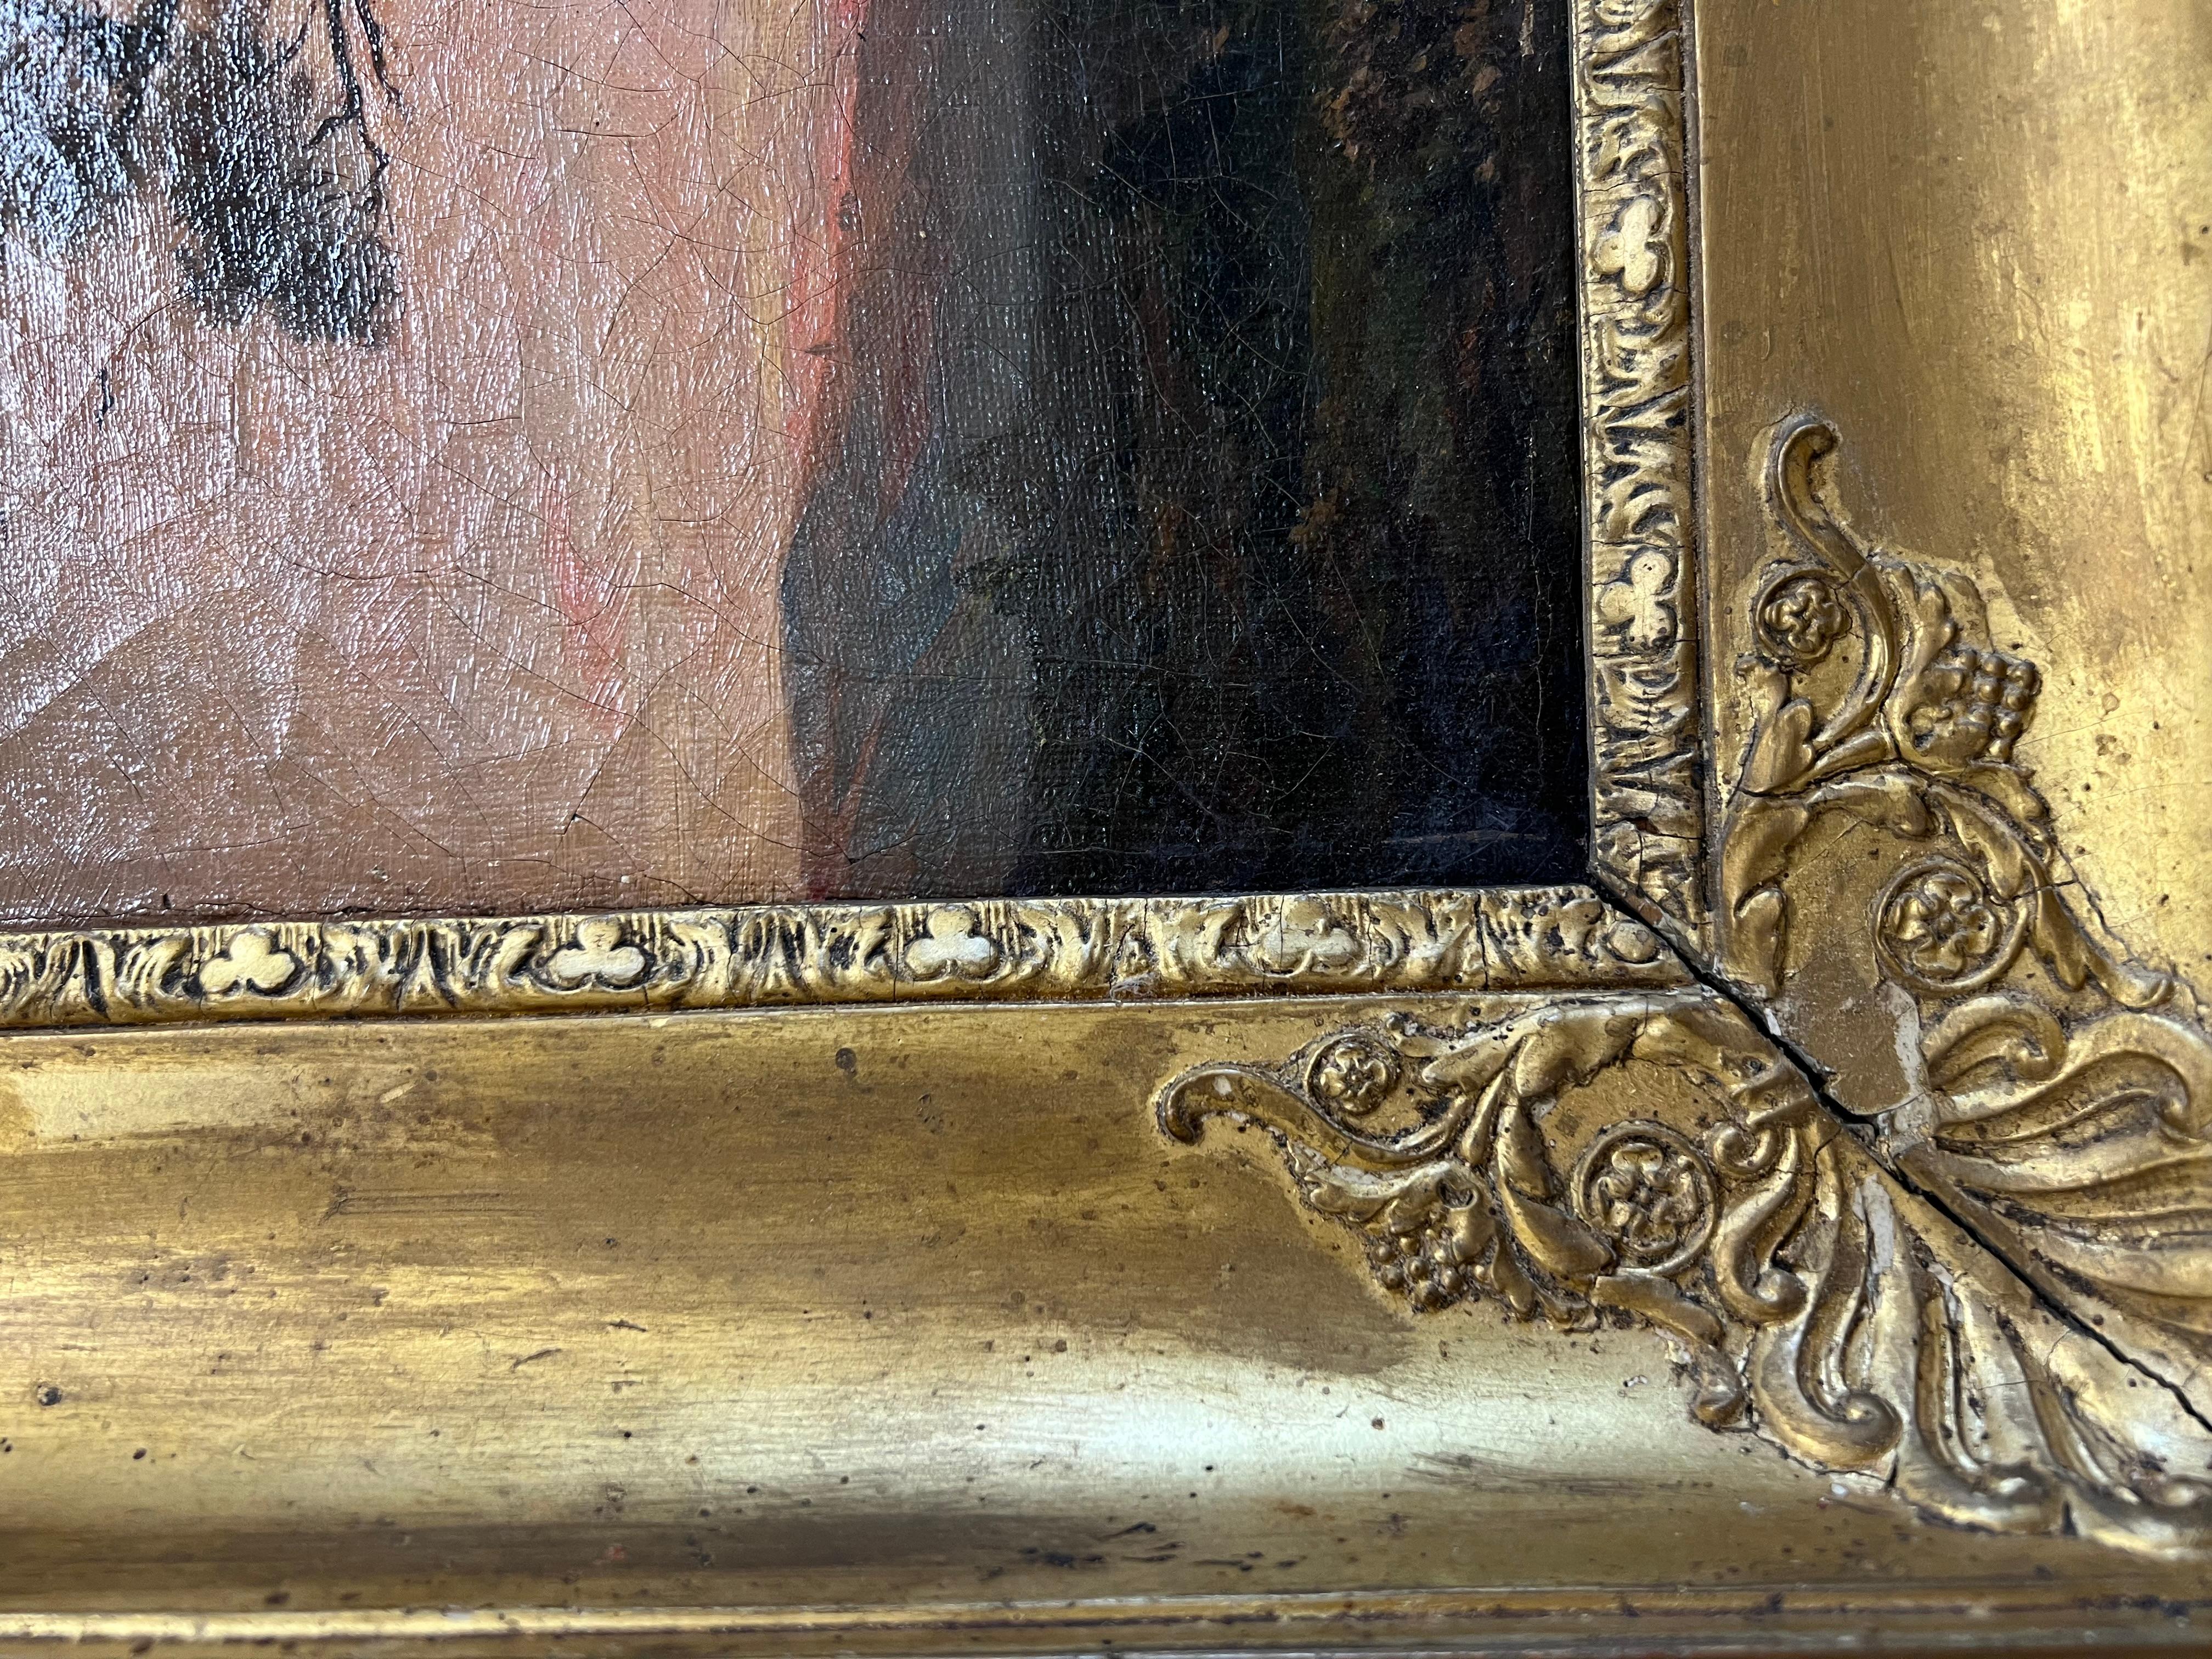 This lovely antique oil scene at dusk would make such a lovely addition to your home or office. The antique gold frame is original and features many beautiful and ornate details.